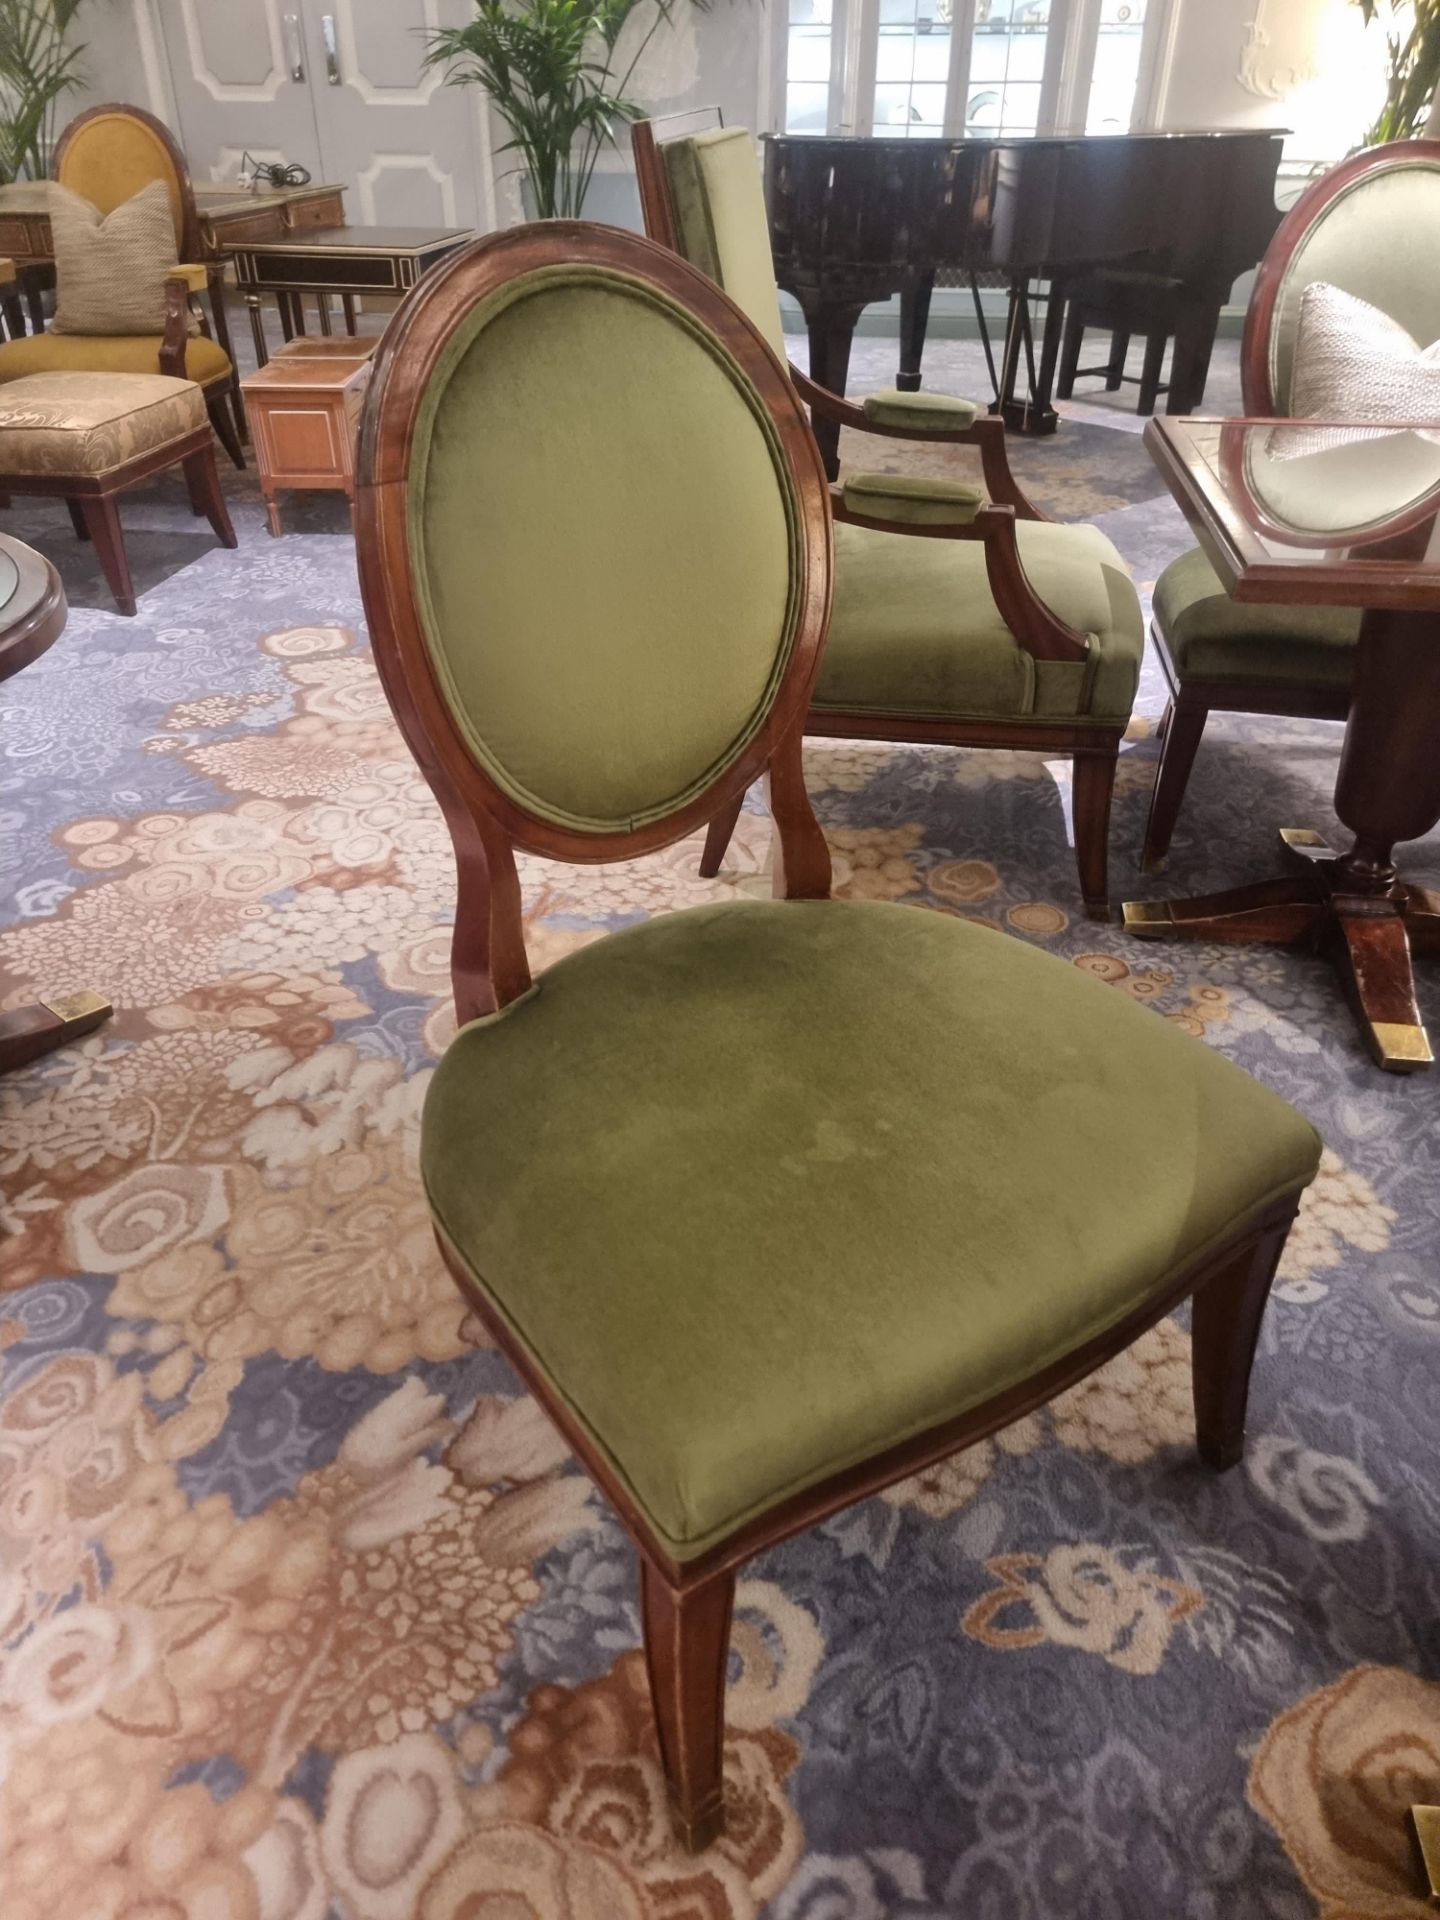 Louis XVI Style Framed And Upholstered Chair In Lelievre Paris Olive Green Salon Chair 68 x 68 x - Image 3 of 3